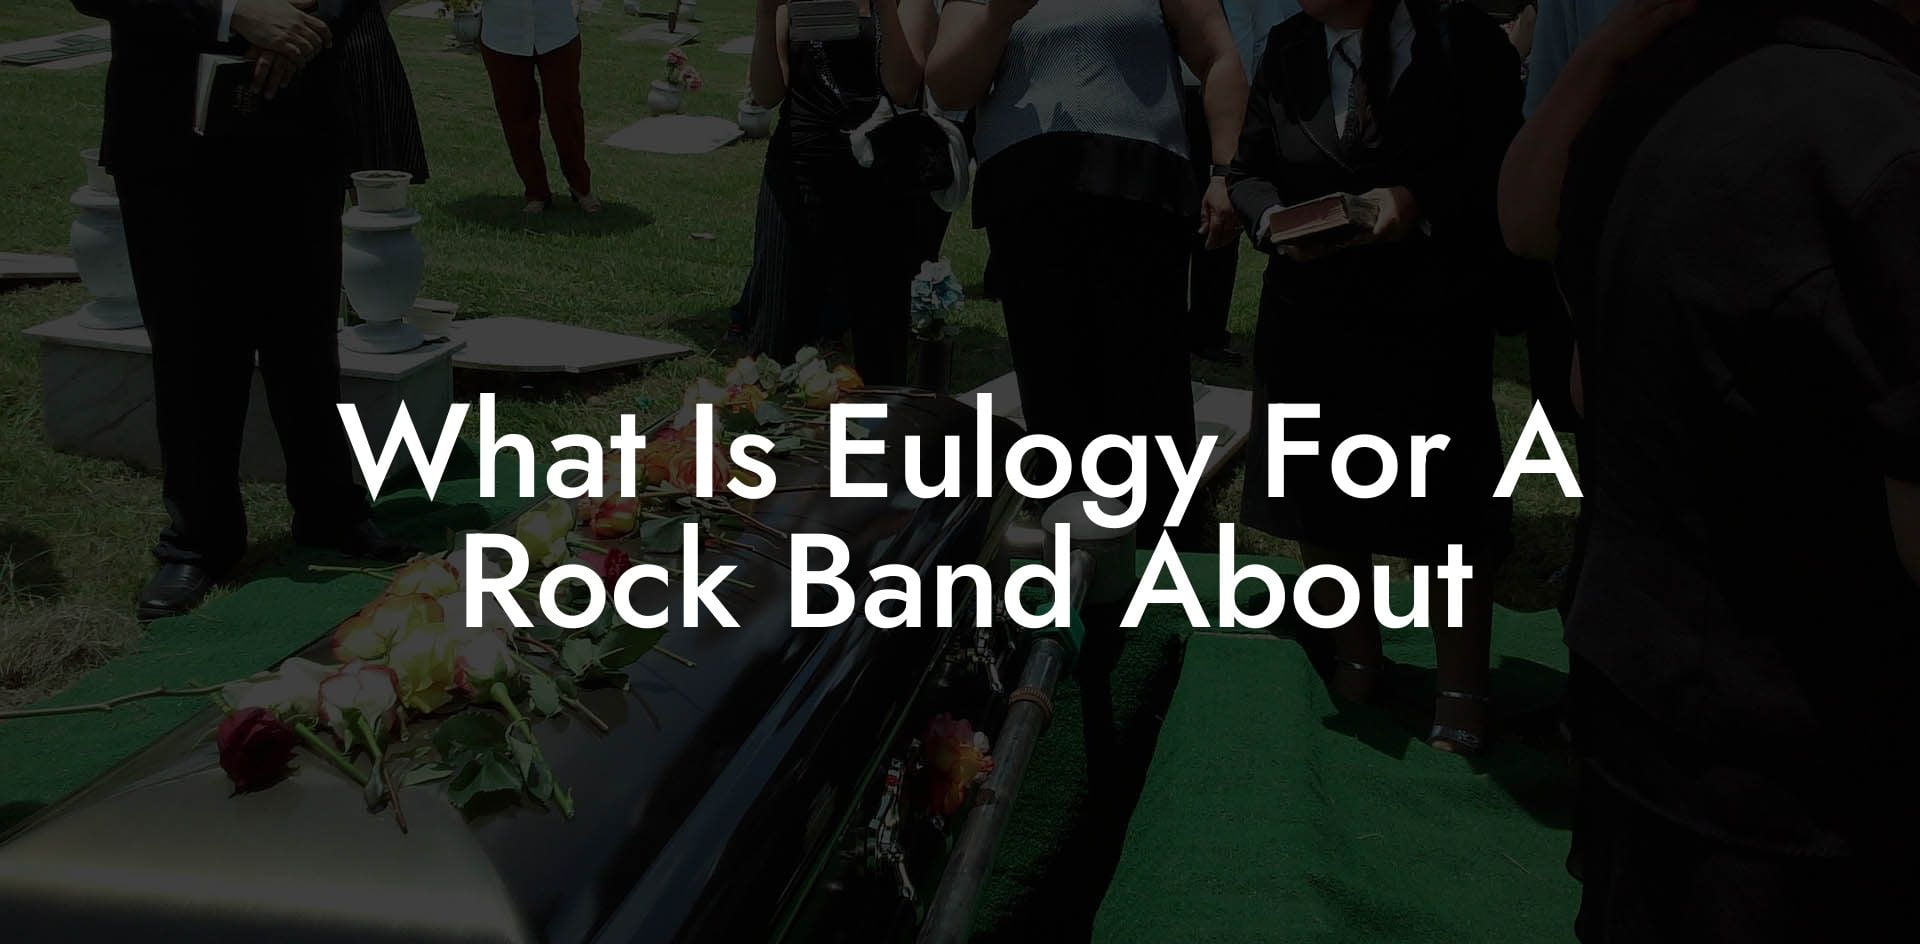 What Is Eulogy For A Rock Band About